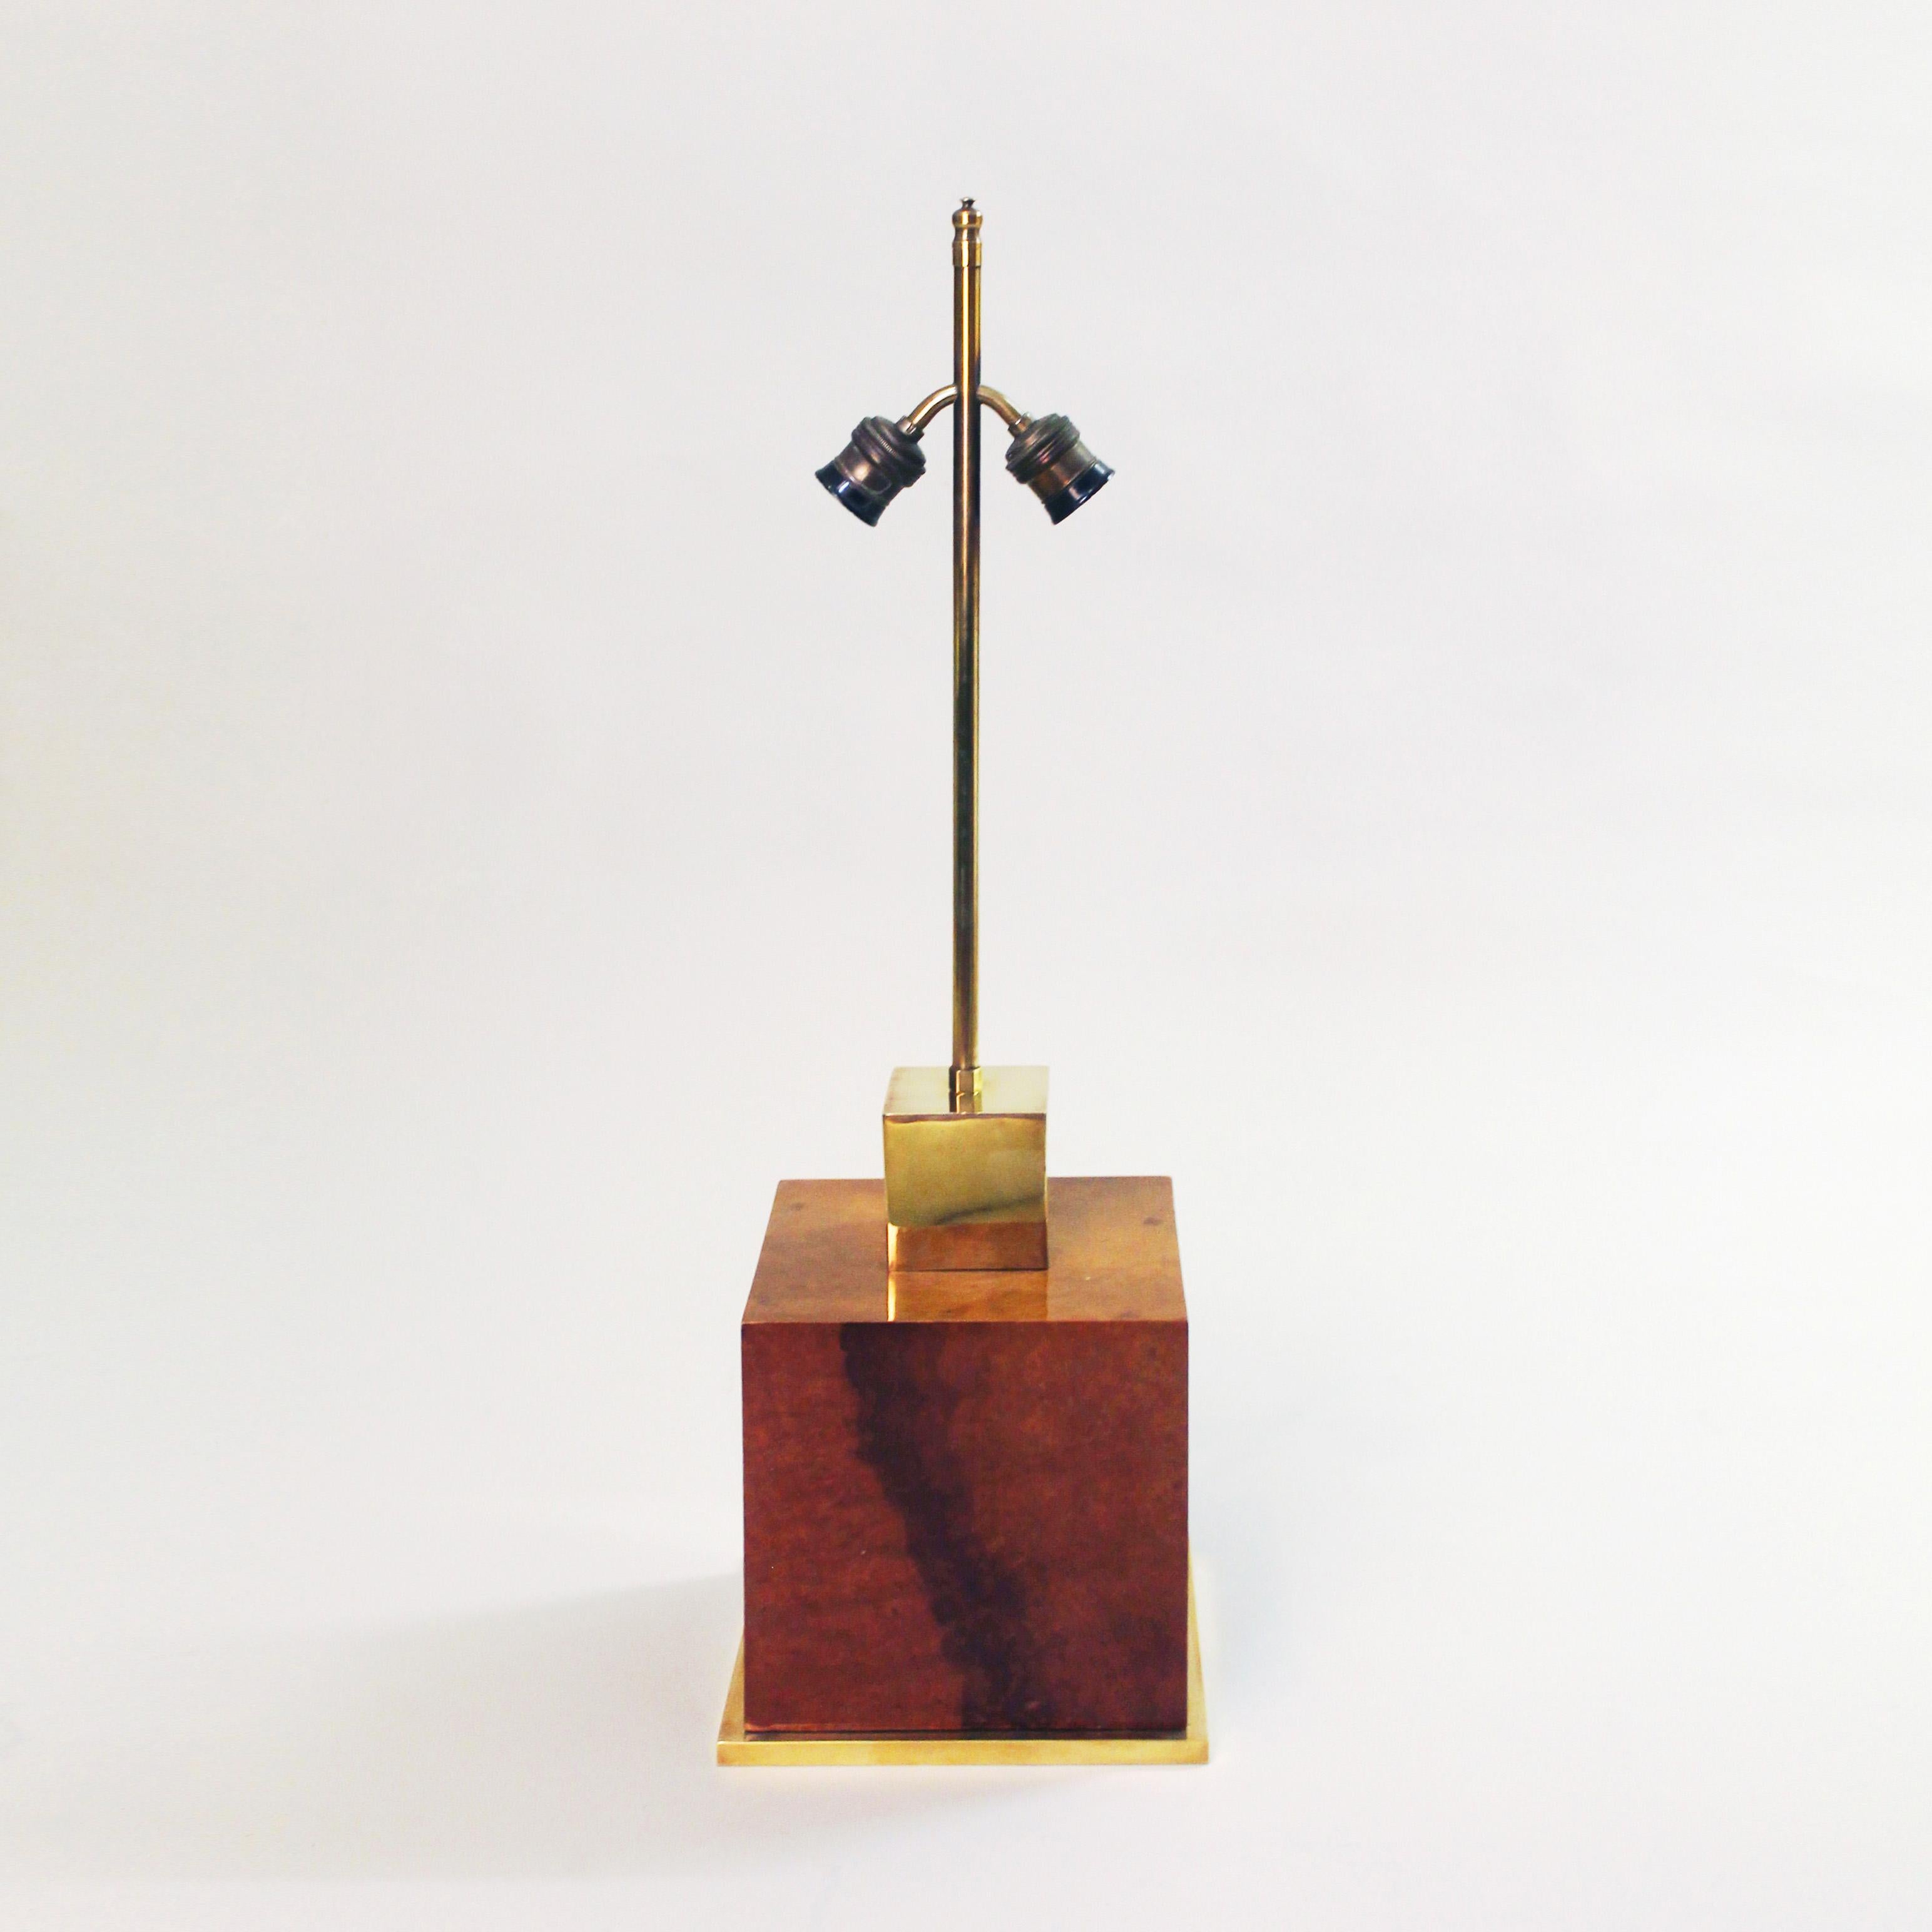 A simple but amazing table lamp in the manner of Willy Rizzo. A large burl walnut lacquered cube body is flanked between a brass base trim and the brass cube and finishings on top. 
The burl wood is beautifully book-matched giving a visually